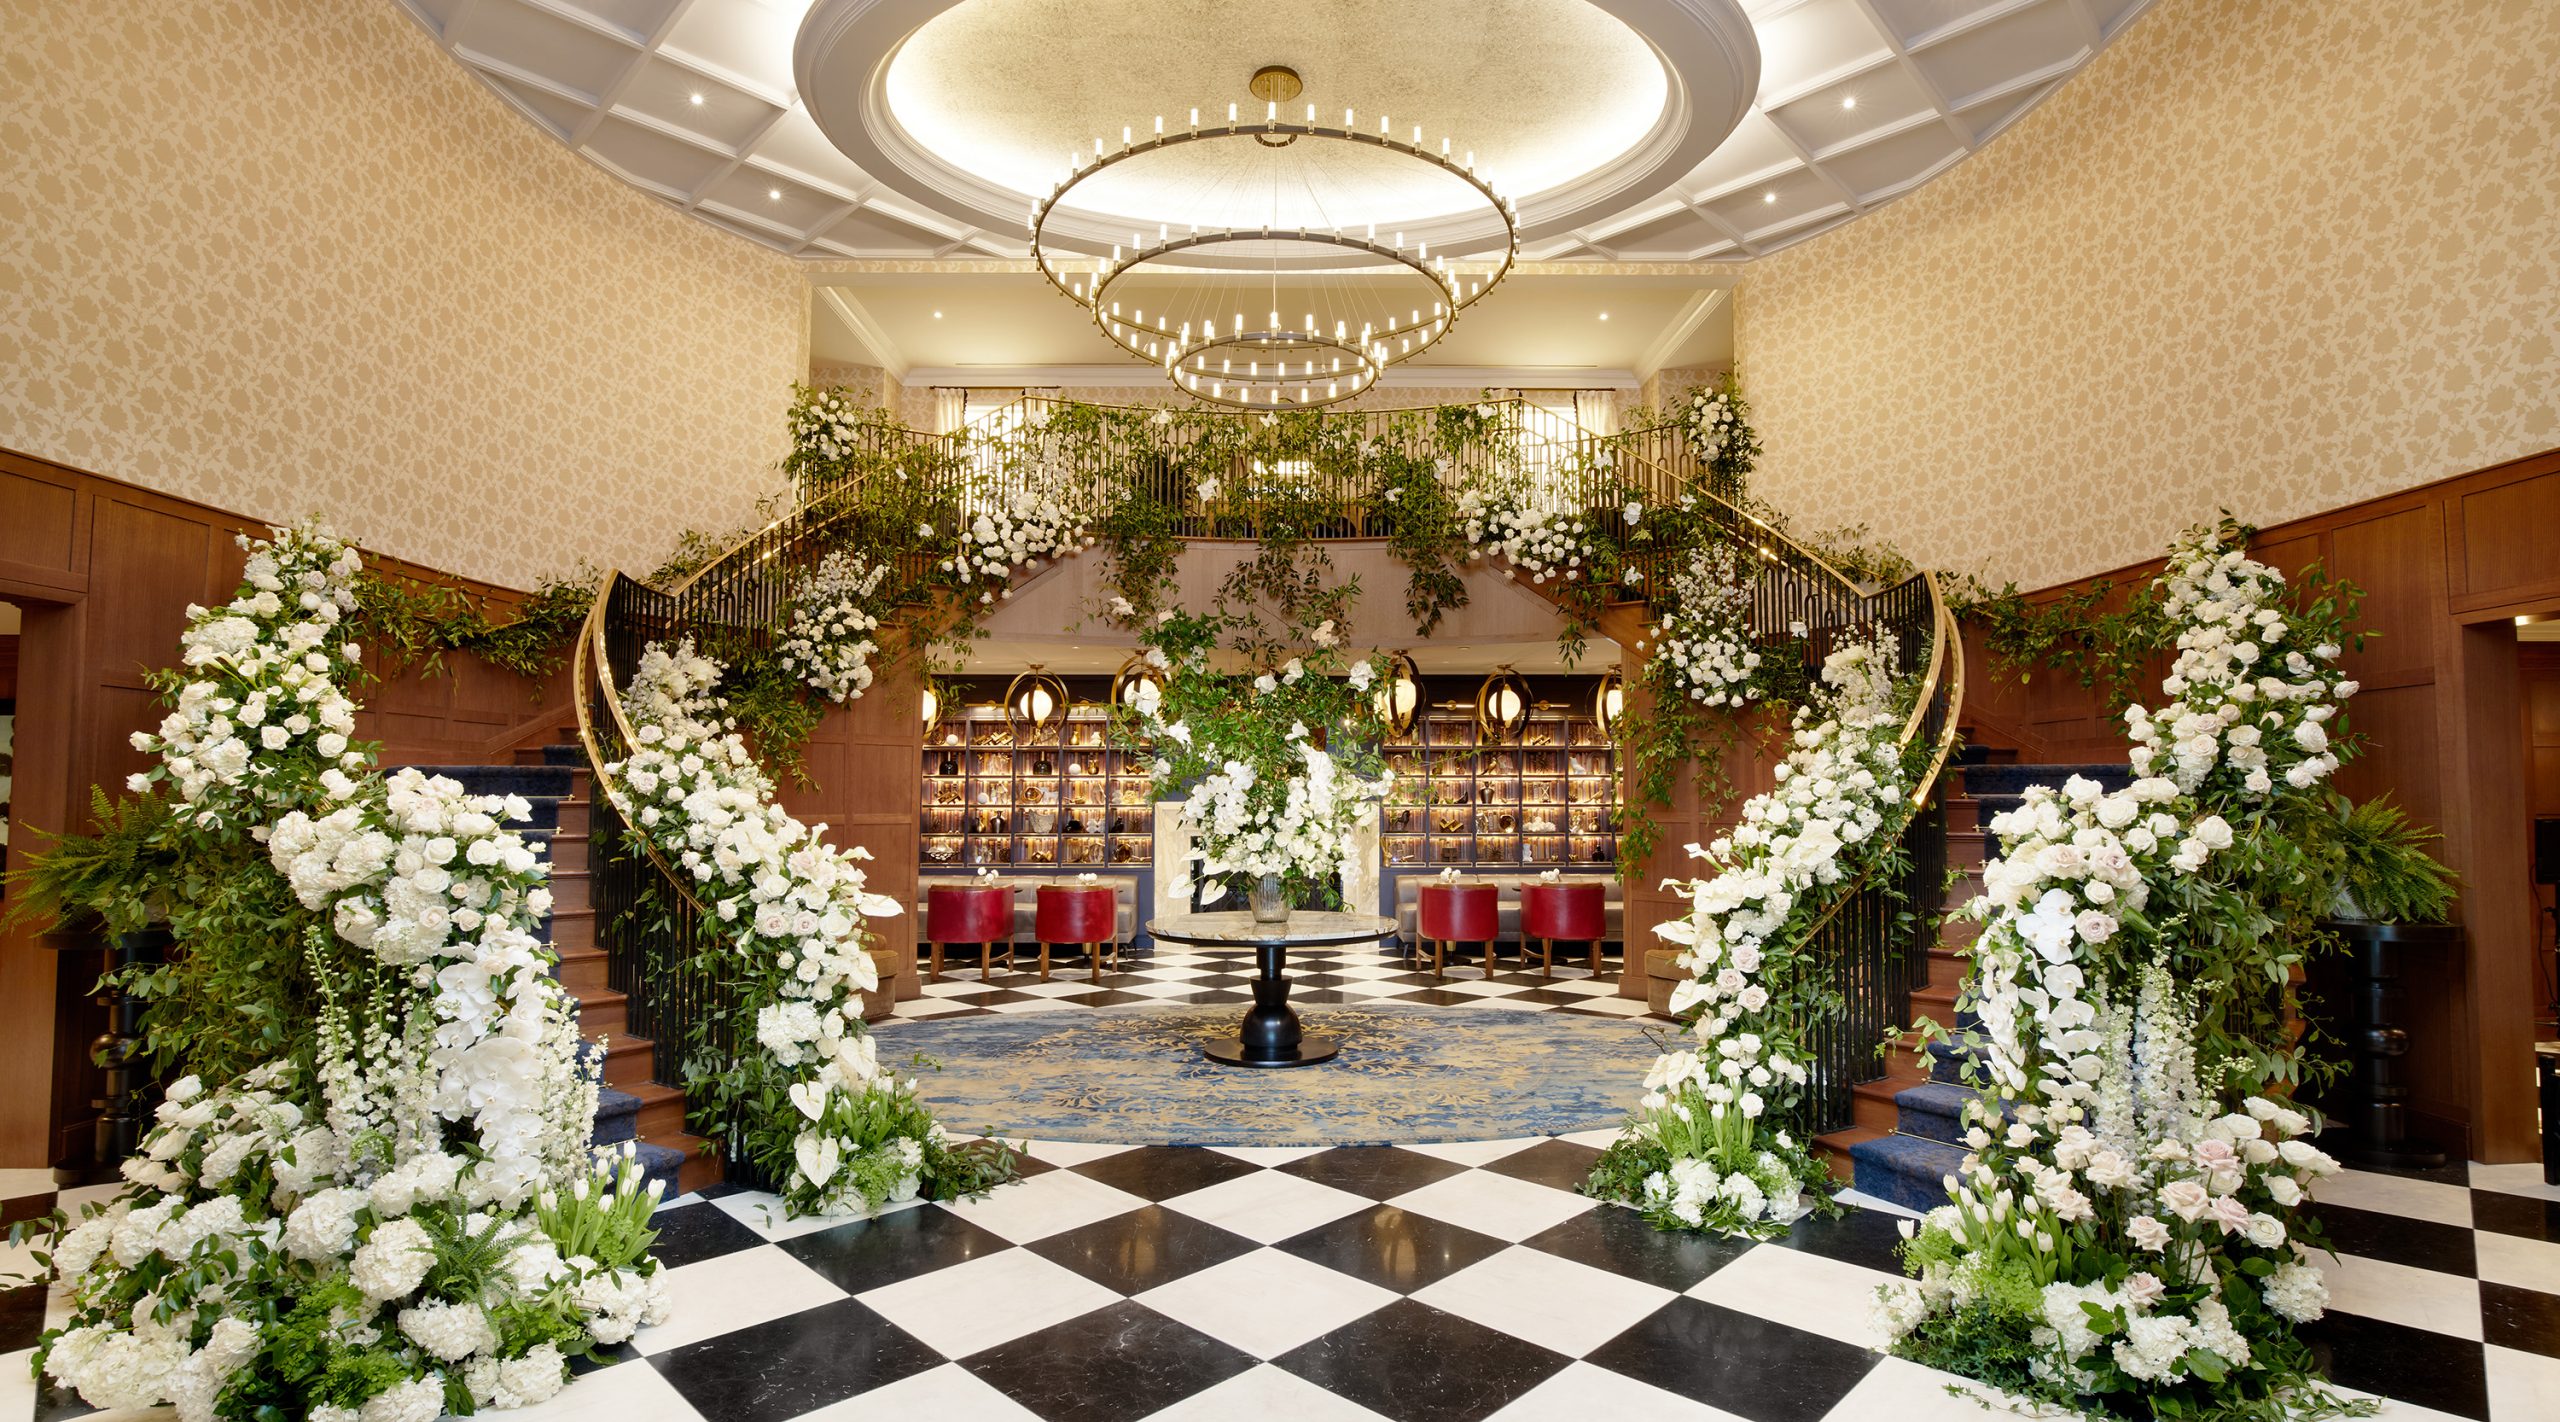 Lobby of The Grand Lodge at Nemacolin with white flowers decorating the lobby, including both sides of the rails on the split staircase